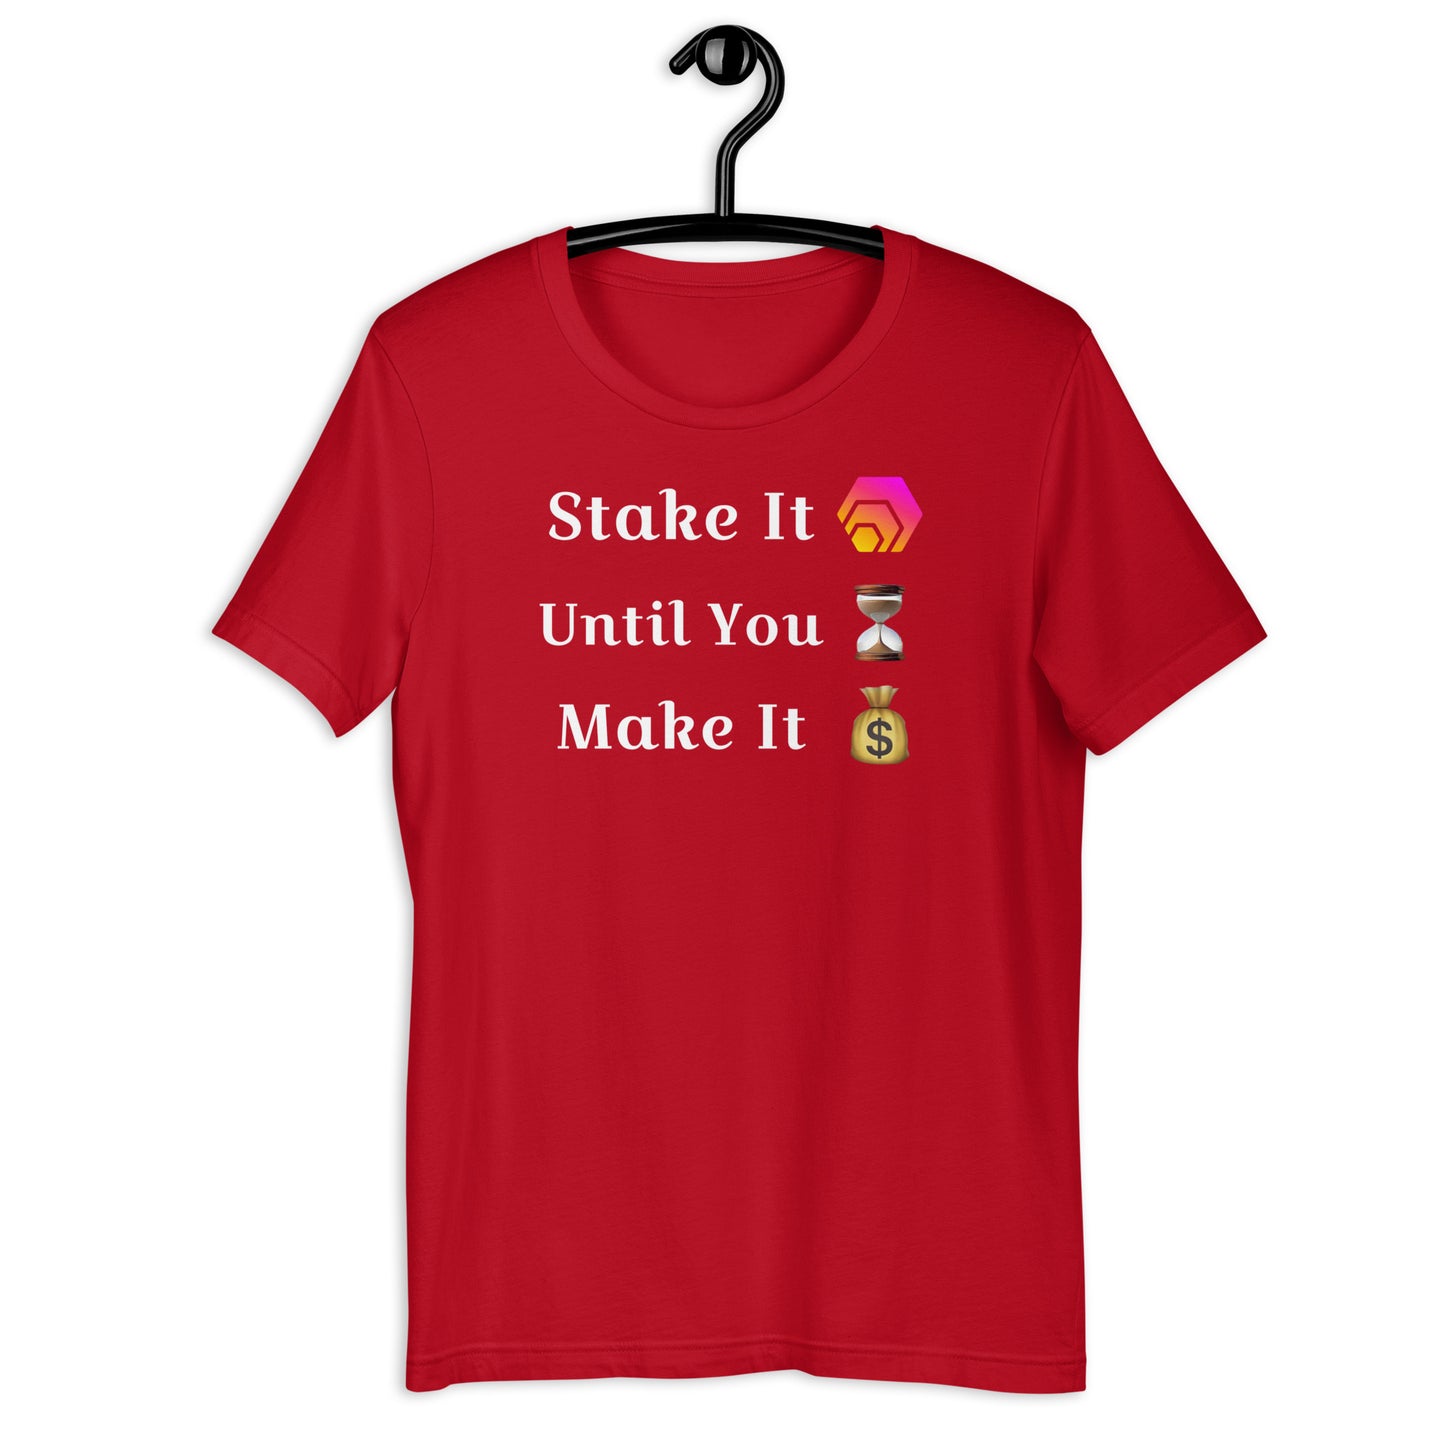 Stake It Until You Make It - HEX - Unisex T-Shirt